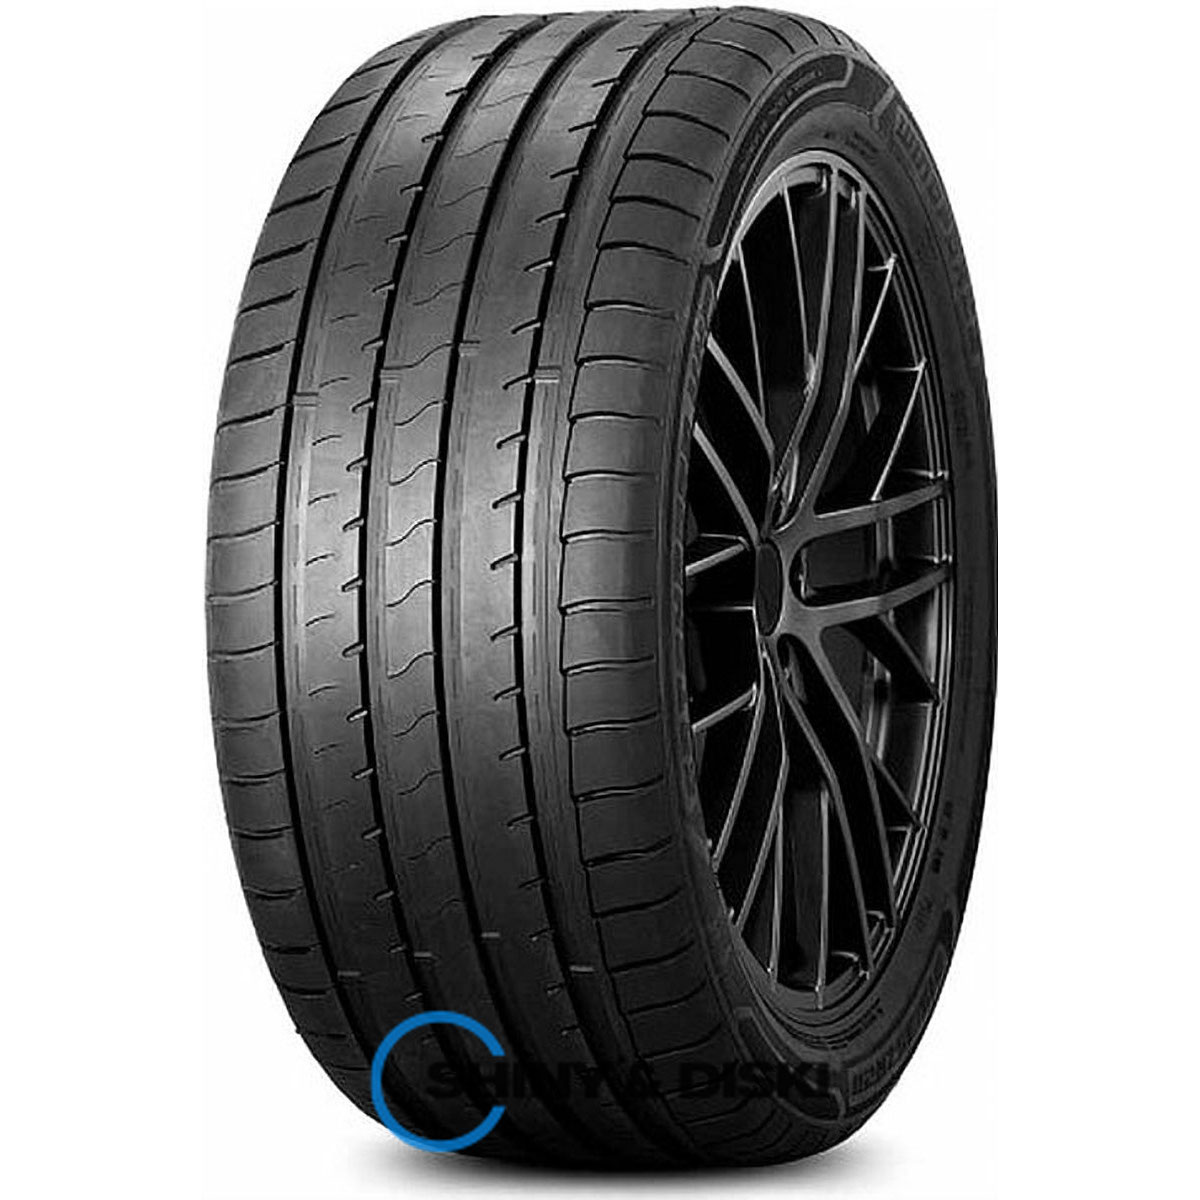 windforce catchfors uhp 275/30 r21 98y xl